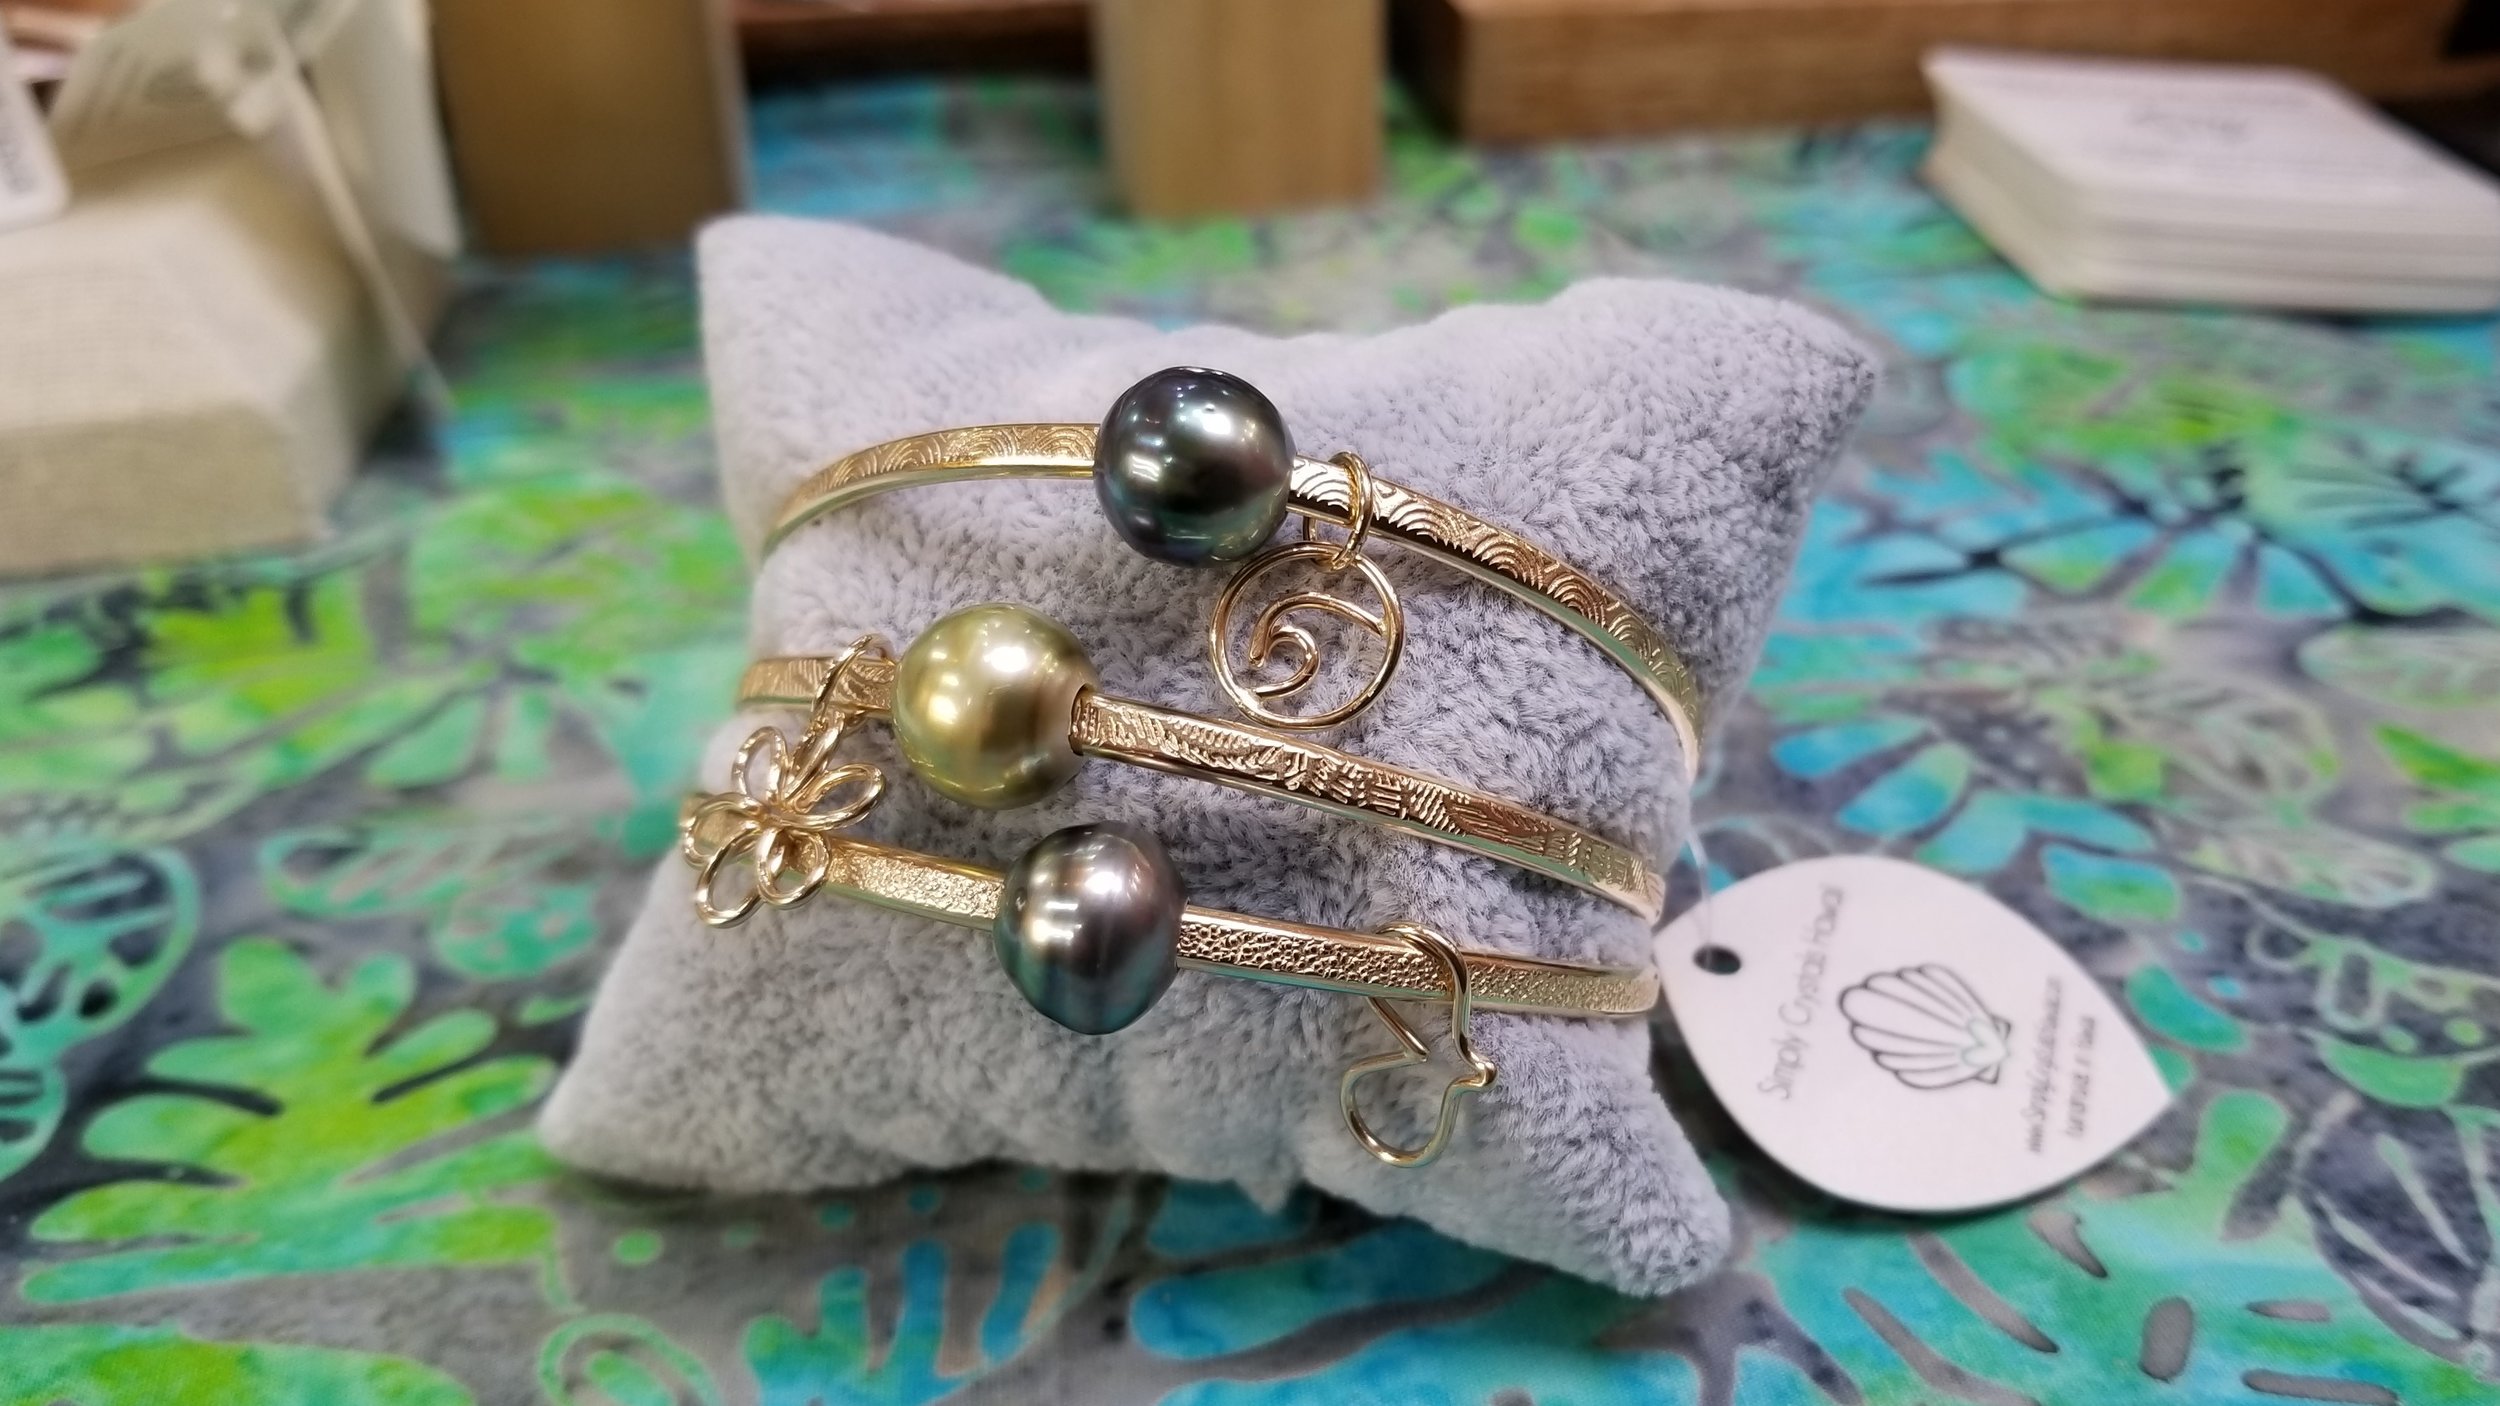 Handmade in Hawaii sustainably and ethically brass and large genuine pearl bangle or cuff stackable bracelet